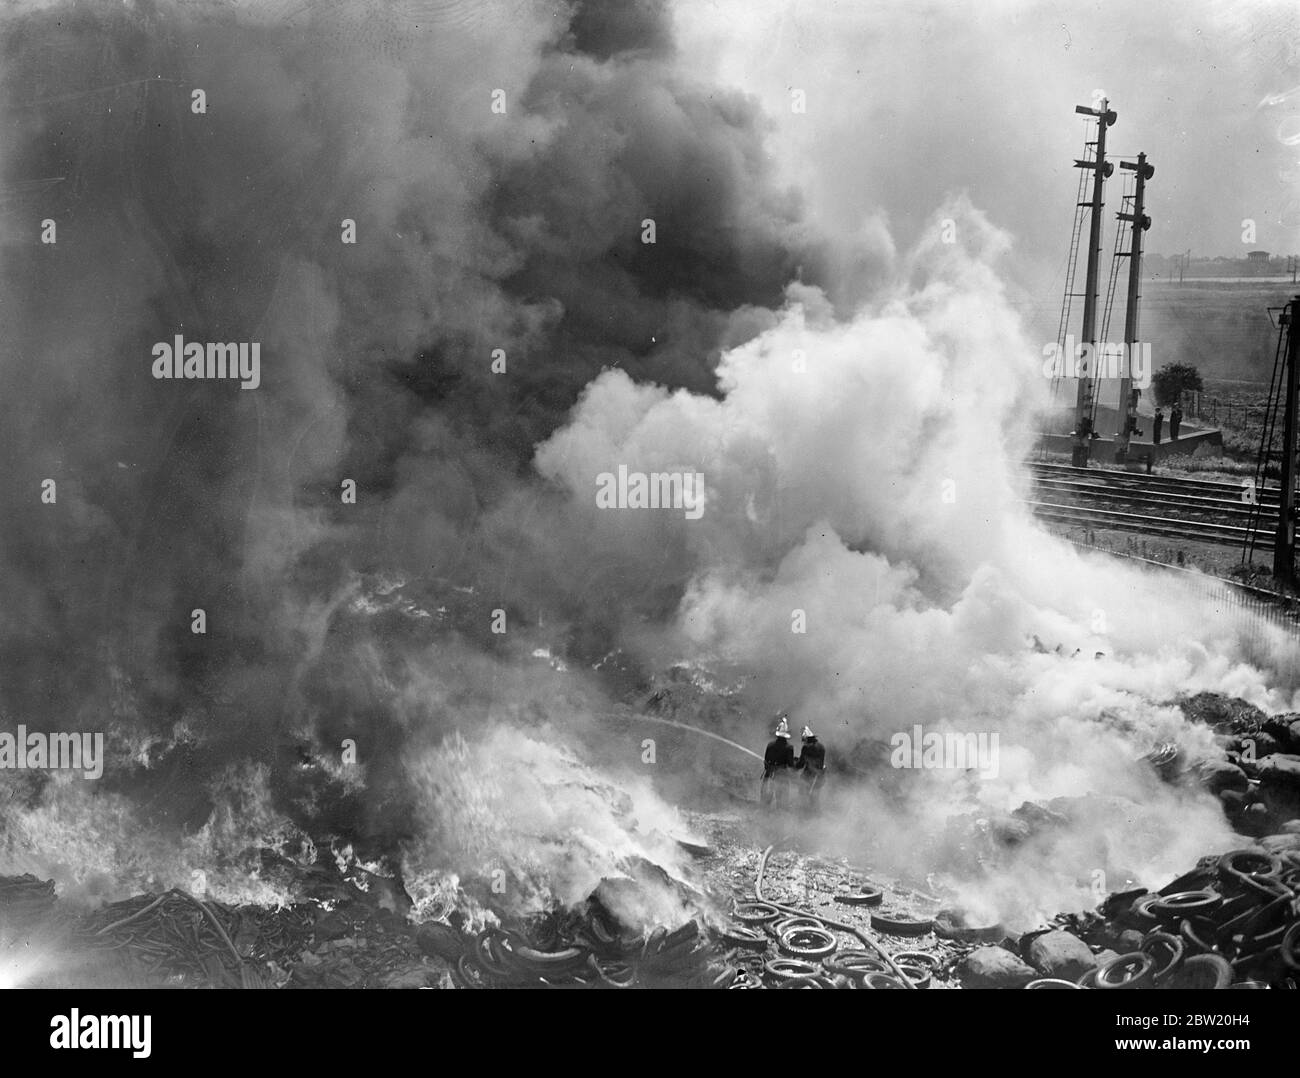 Dense clouds of smoke rising from the burning rubber as firemen fought the blaze which raged for hours at a rubber tyre dump in Markfield Road, Tottenham. 29 June 1937 Stock Photo